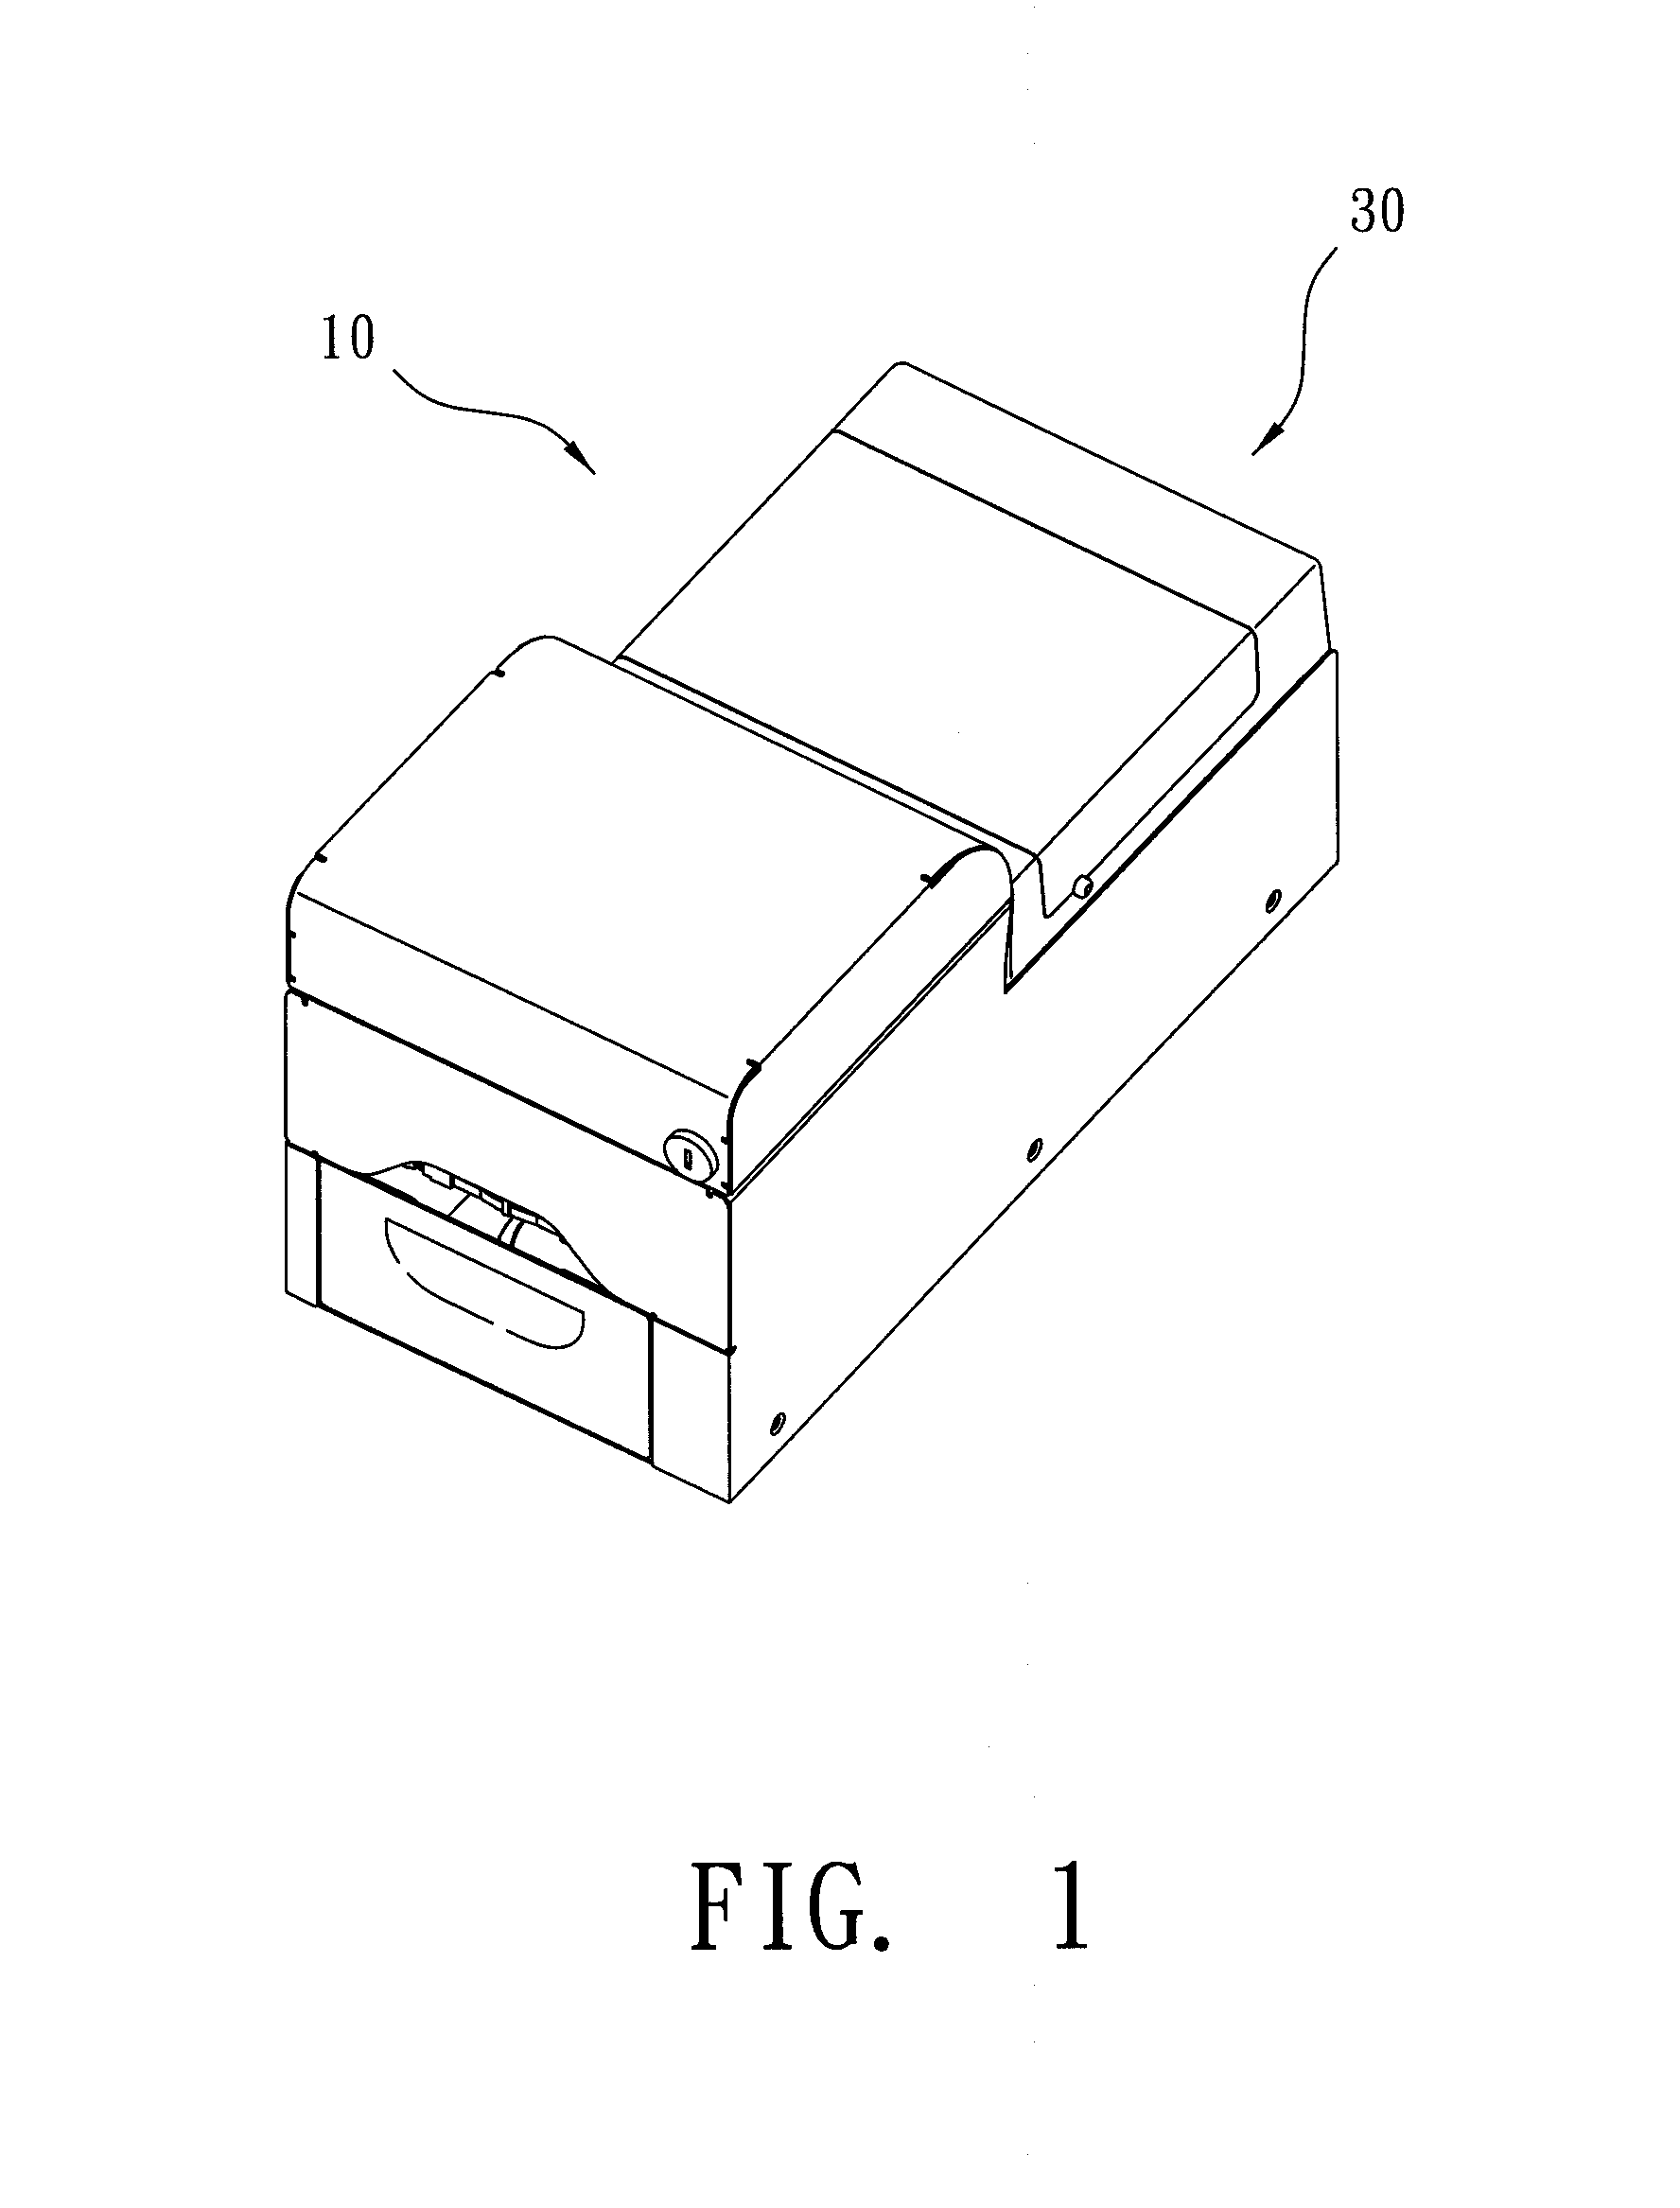 Auto feed, copy and print apparatus for information storage disks and method of the same